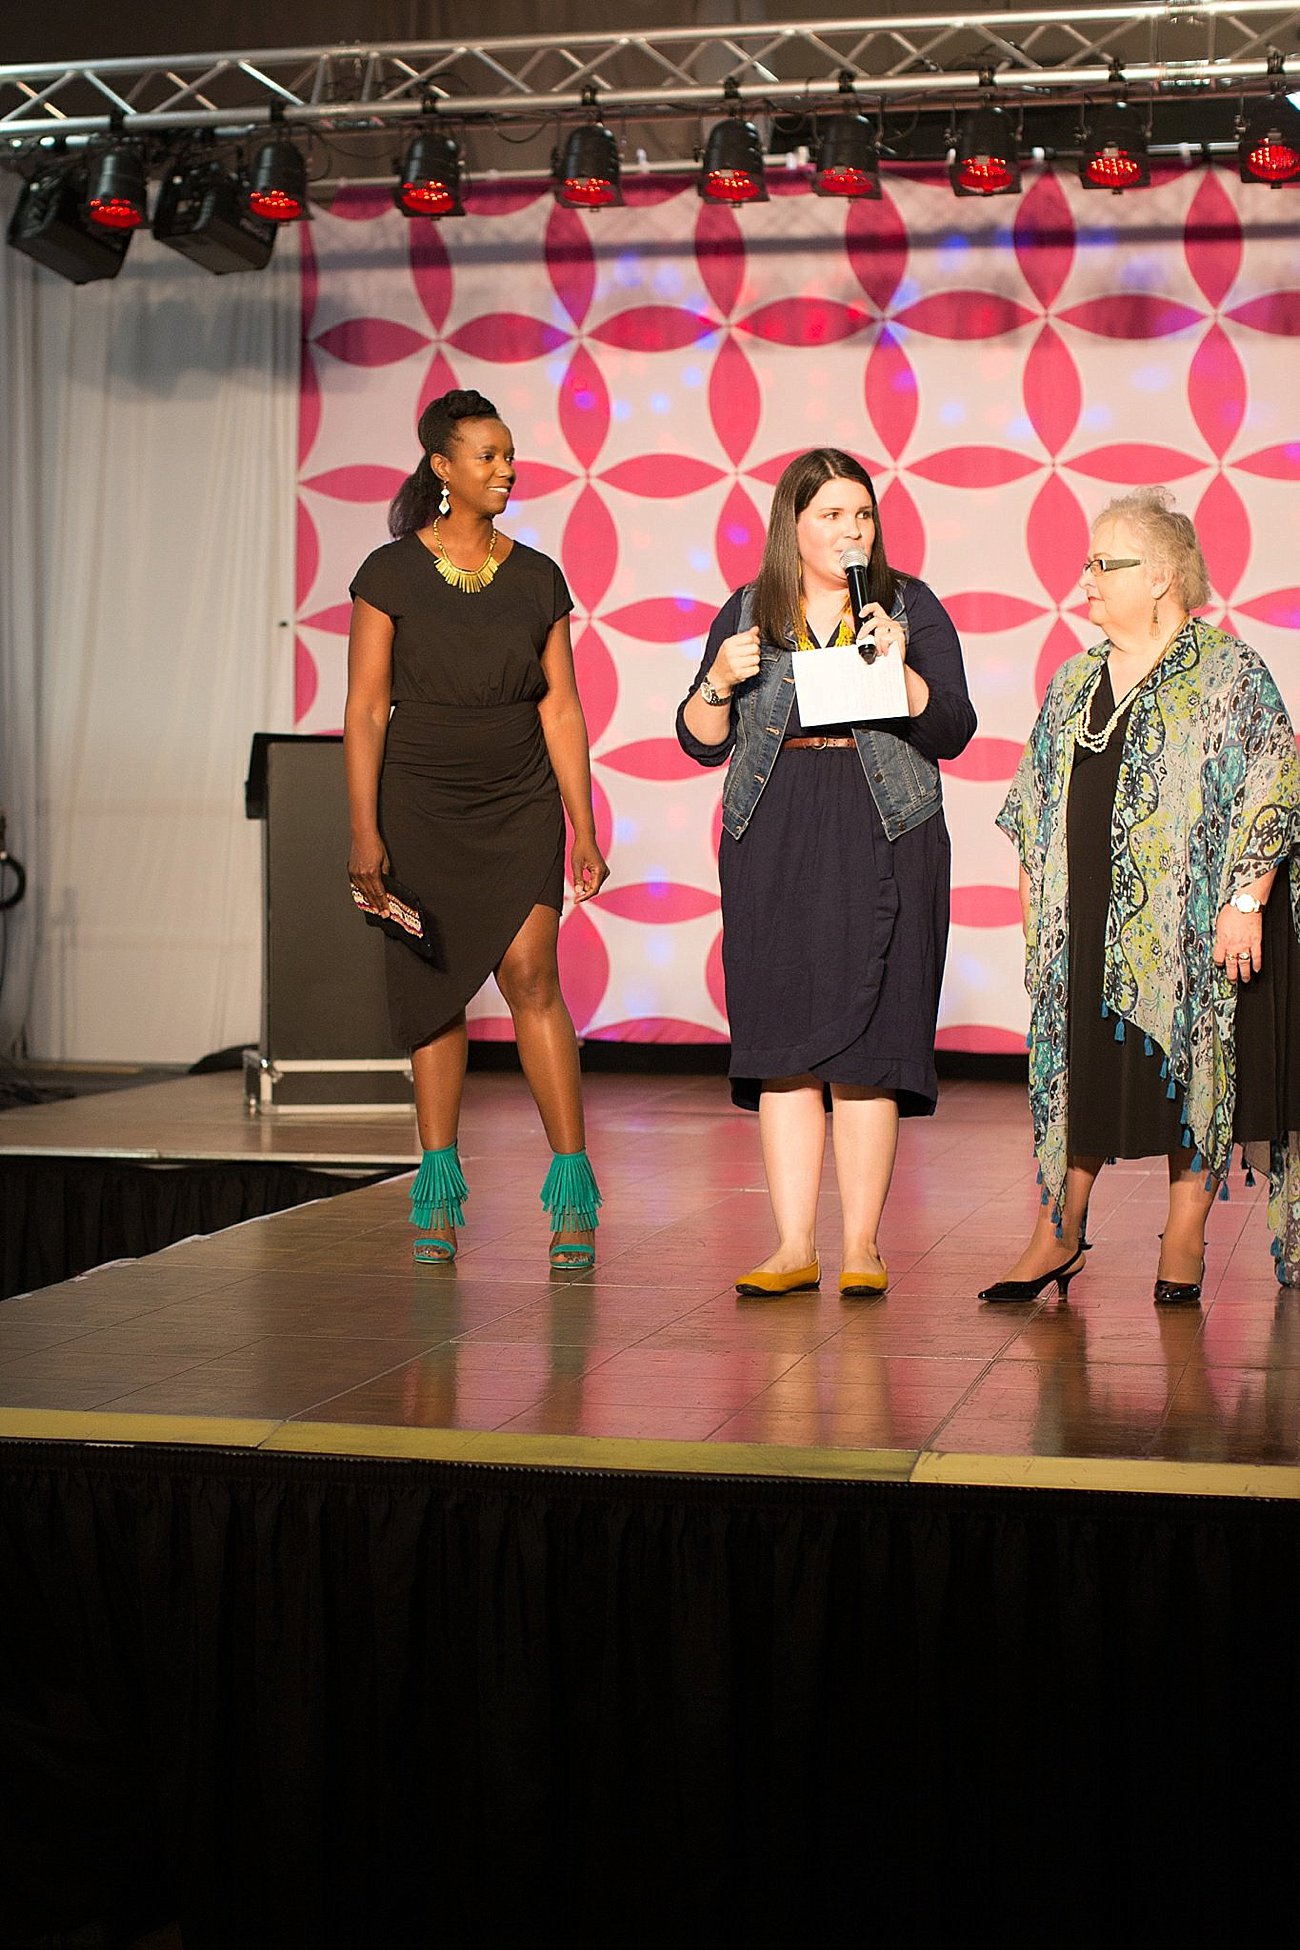 "Dressing with Purpose" Ethical Fashion Show at the Southern Women's Show in Raleigh, North Carolina 2016 | triFABB and Still Being Molly | North Carolina Fashion & Style Blogger (12)